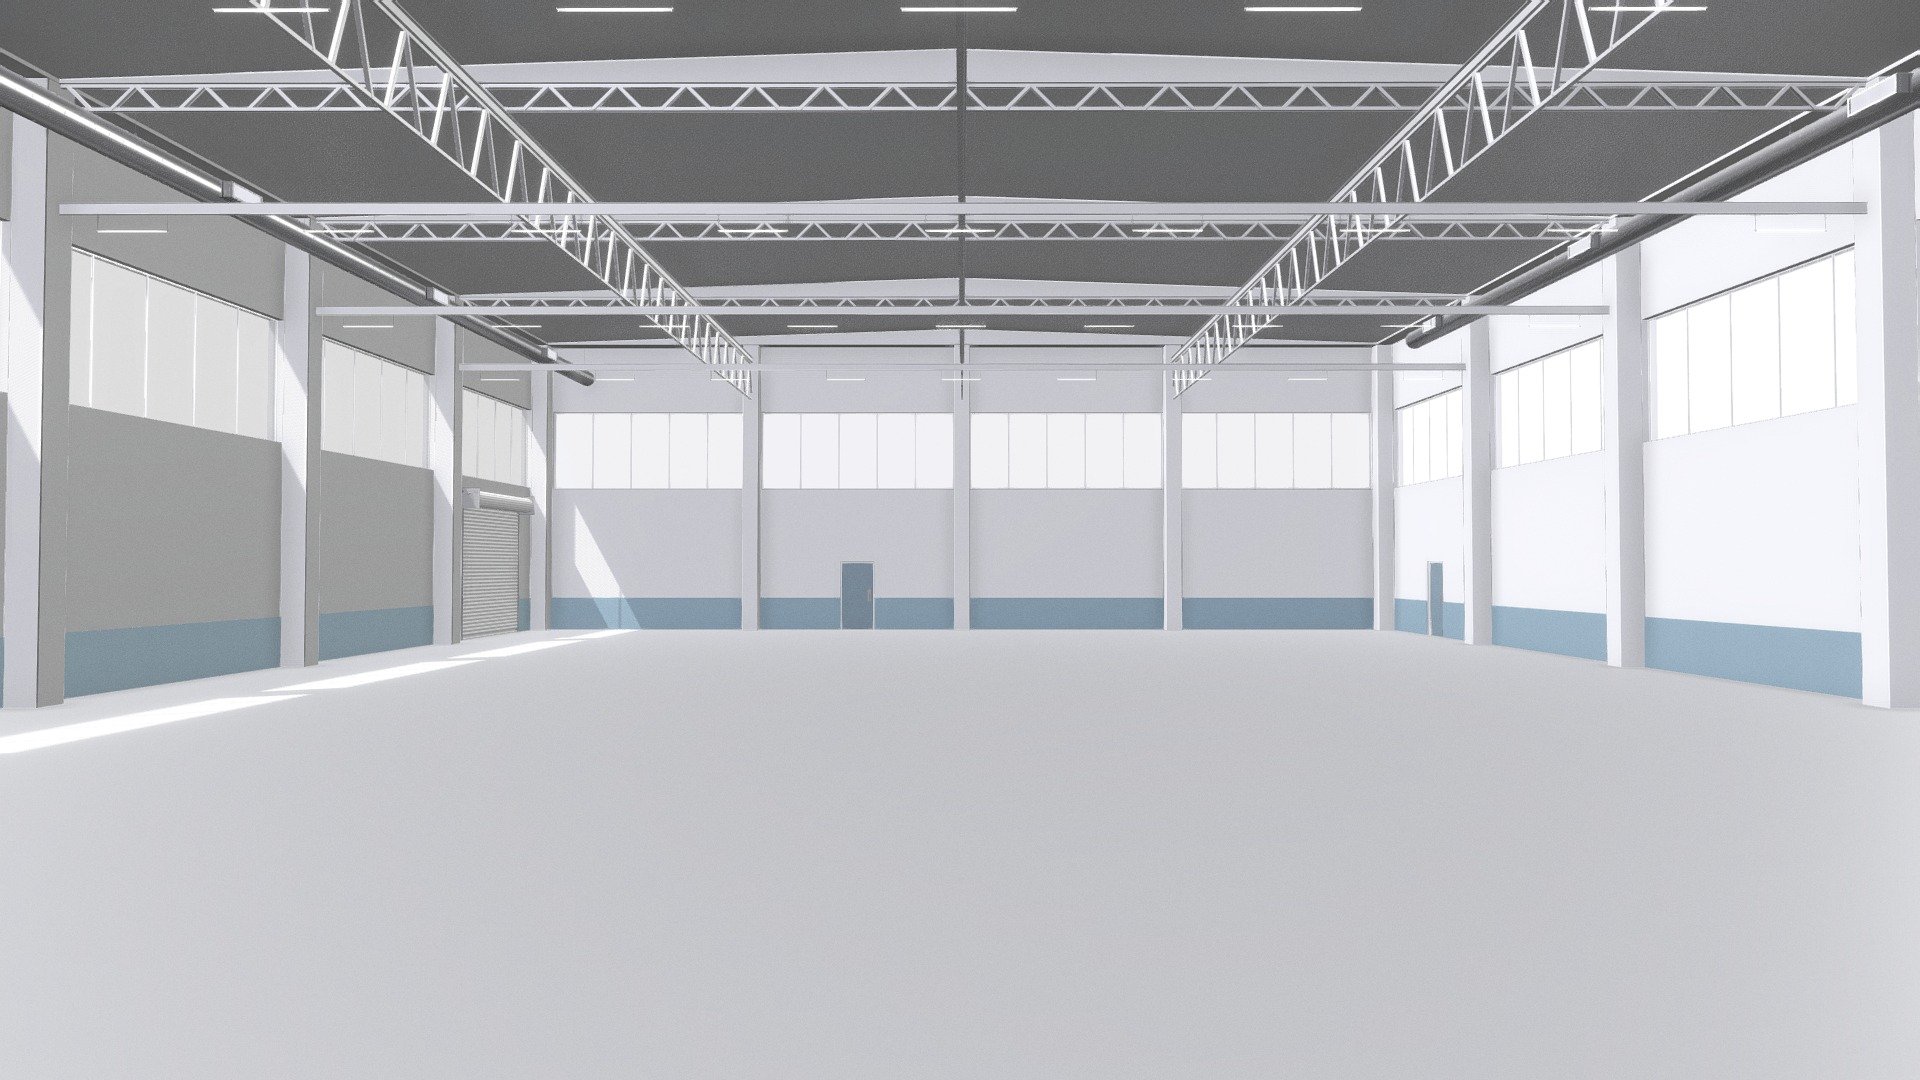 Warehouse Interior 1

Measurements:




L: 40.5m, W: 27.2m, H: 9.0m

IMPORTANT NOTES:




This model does not have textures or materials, but it has separate generic materials, it is also separated into parts, so you can easily assign your own materials.

Model units are in meters.

If you have any doubts or questions about this model, you can send us a message 3d model